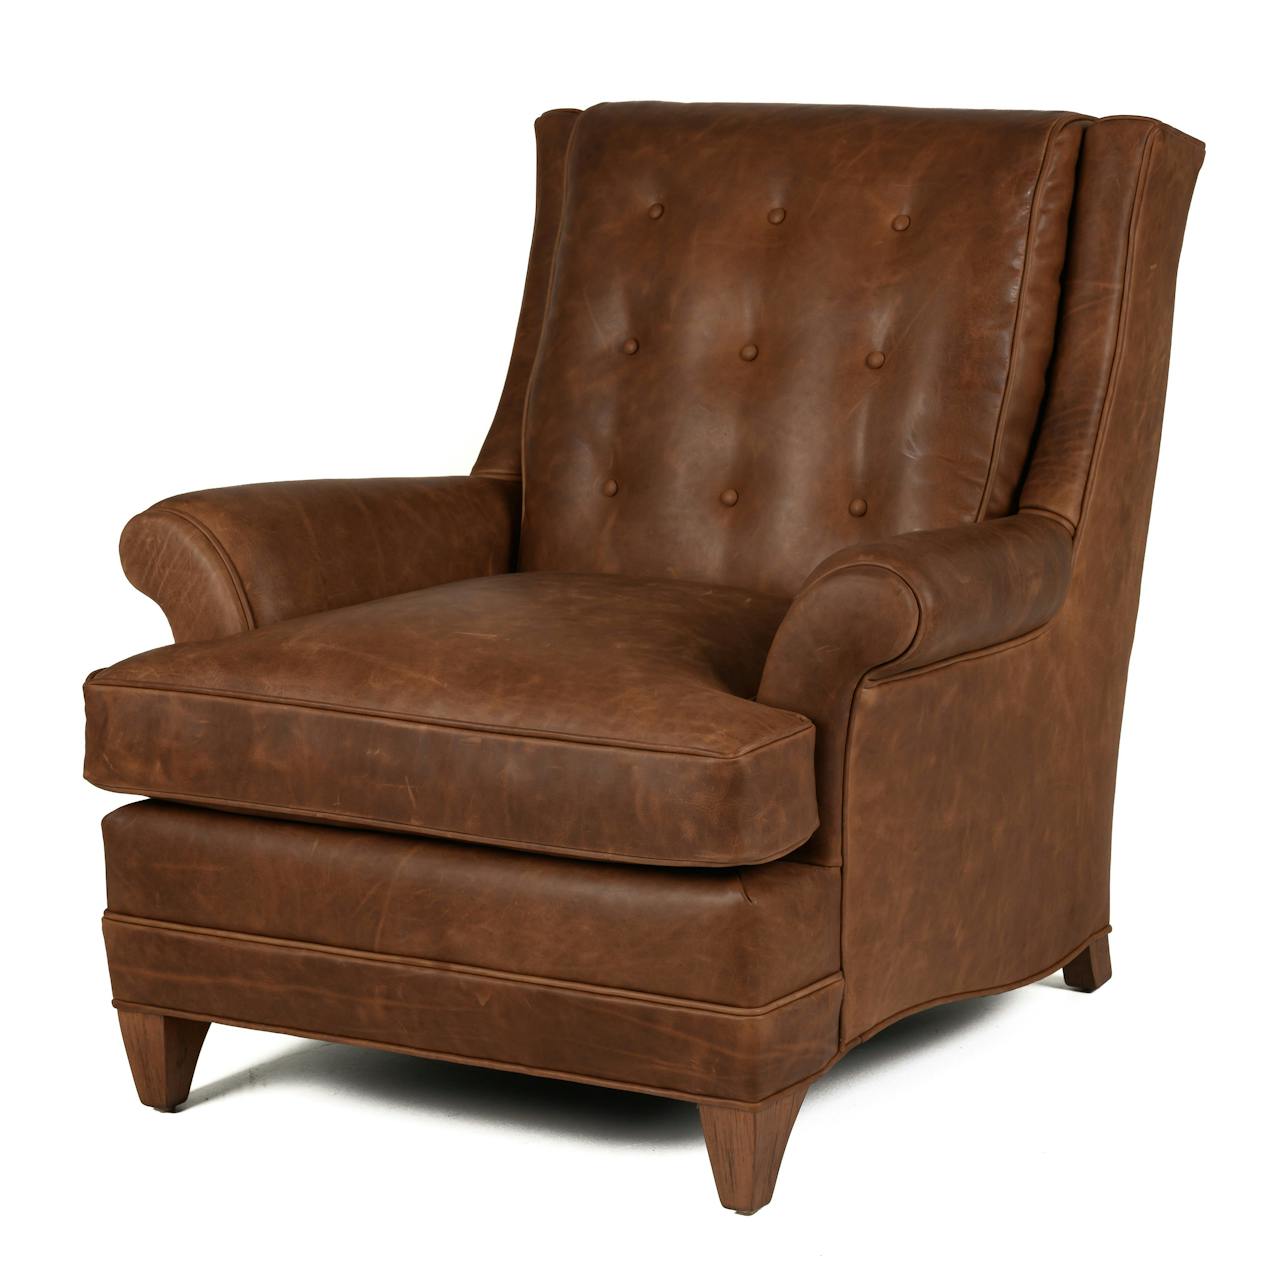 Moore & Giles Jefferson Street Armchair (Made to Order)